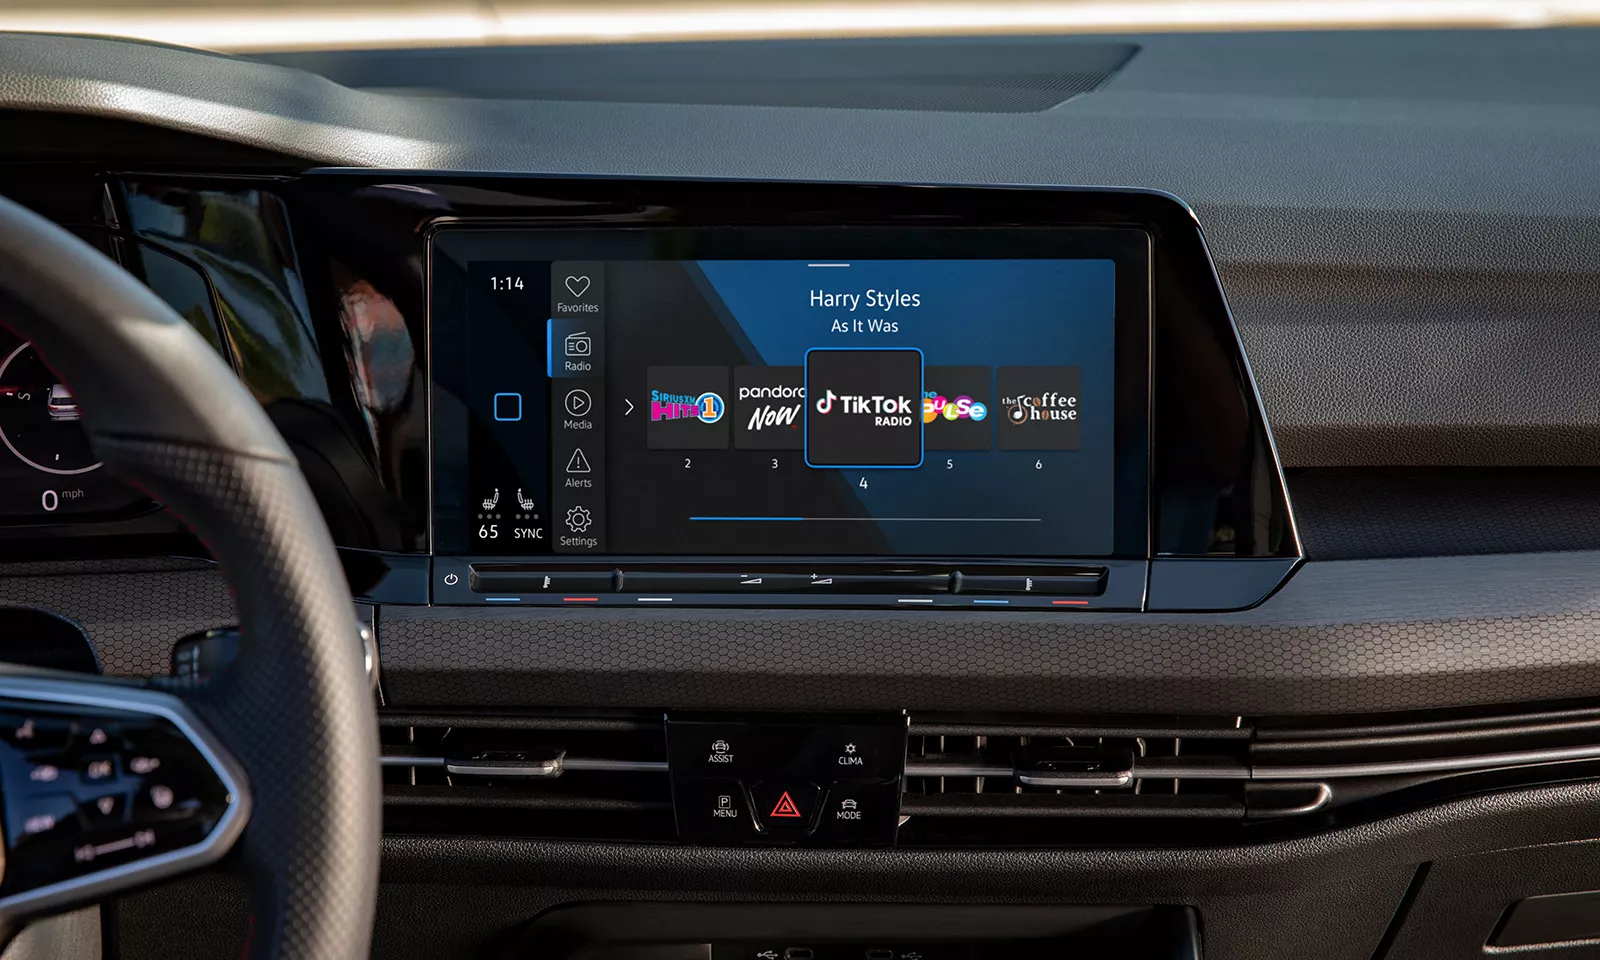 2023 VW Golf R Sirius XM showing available channels